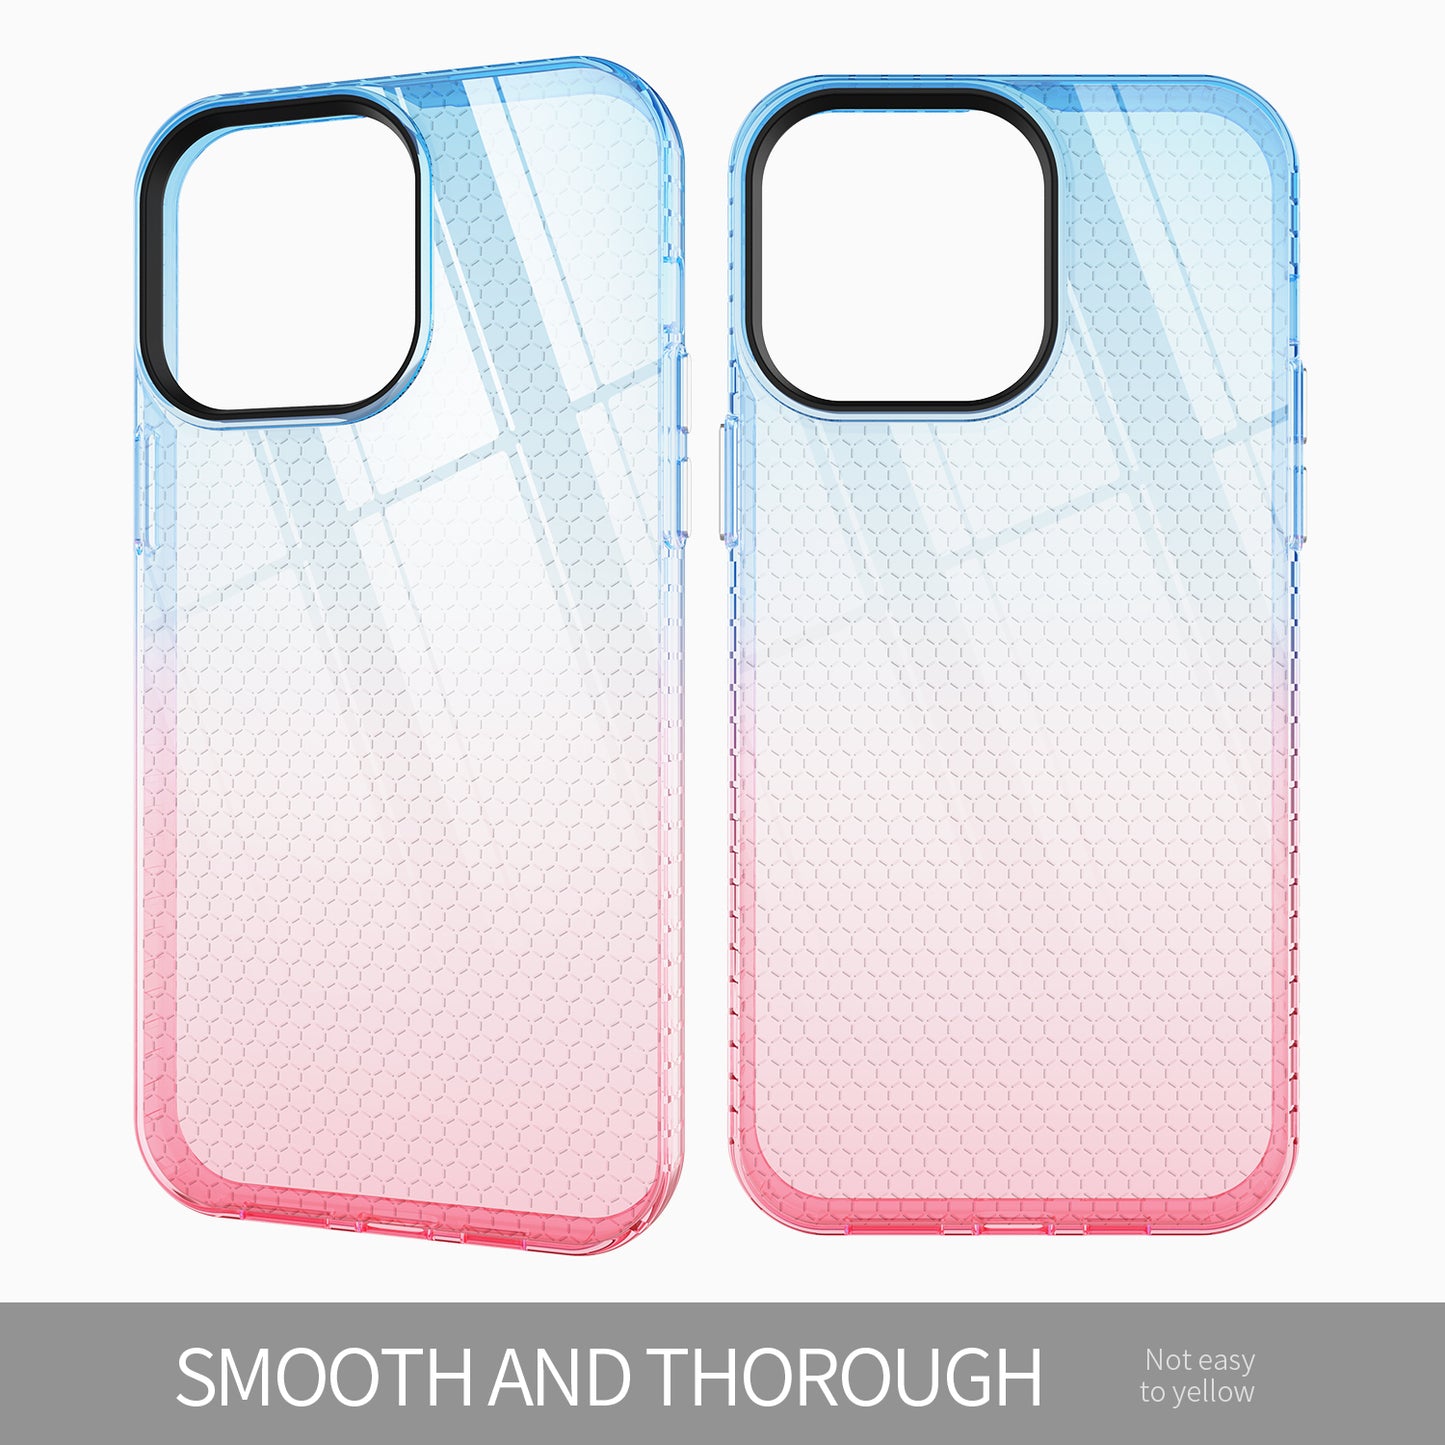 phone case luxury gradient clear soft tpu shockproof cell phone case for iphone 11 pro max